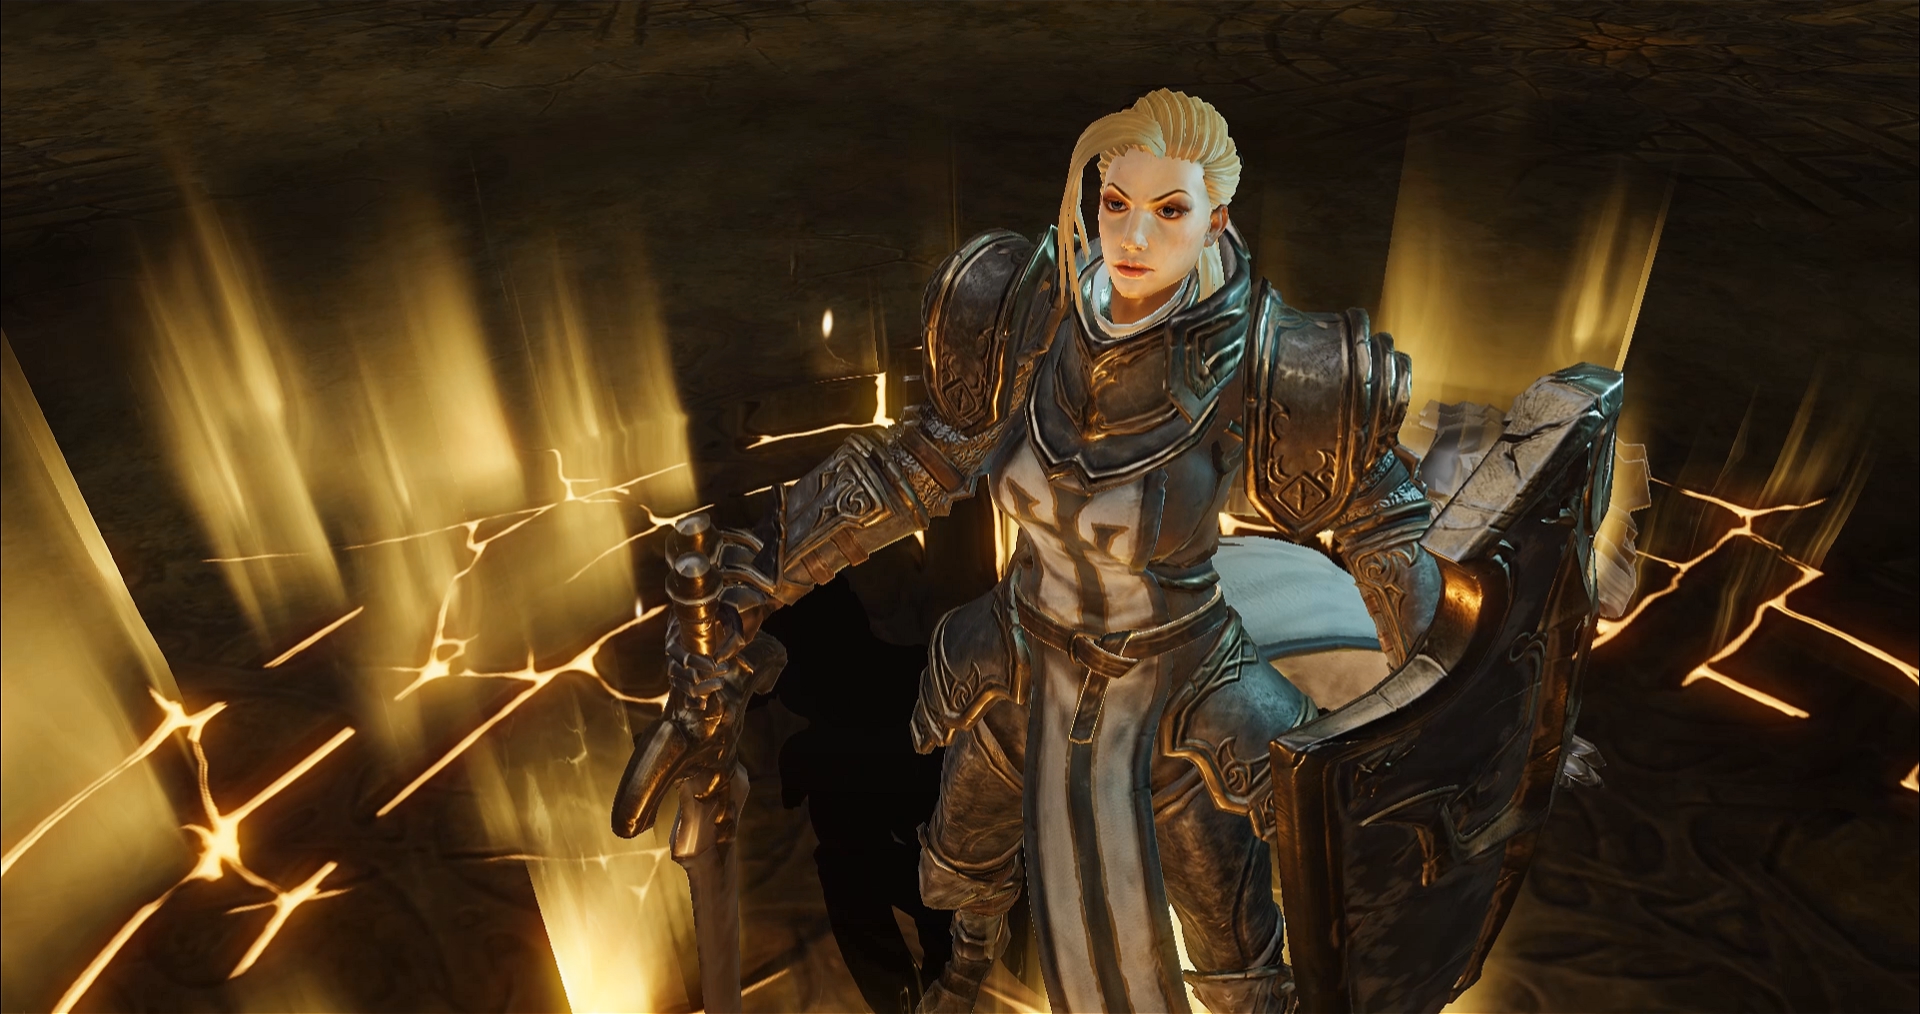 Diablo Immortal cinematic screenshot showing the crusader character standing atop a glowing sigil.